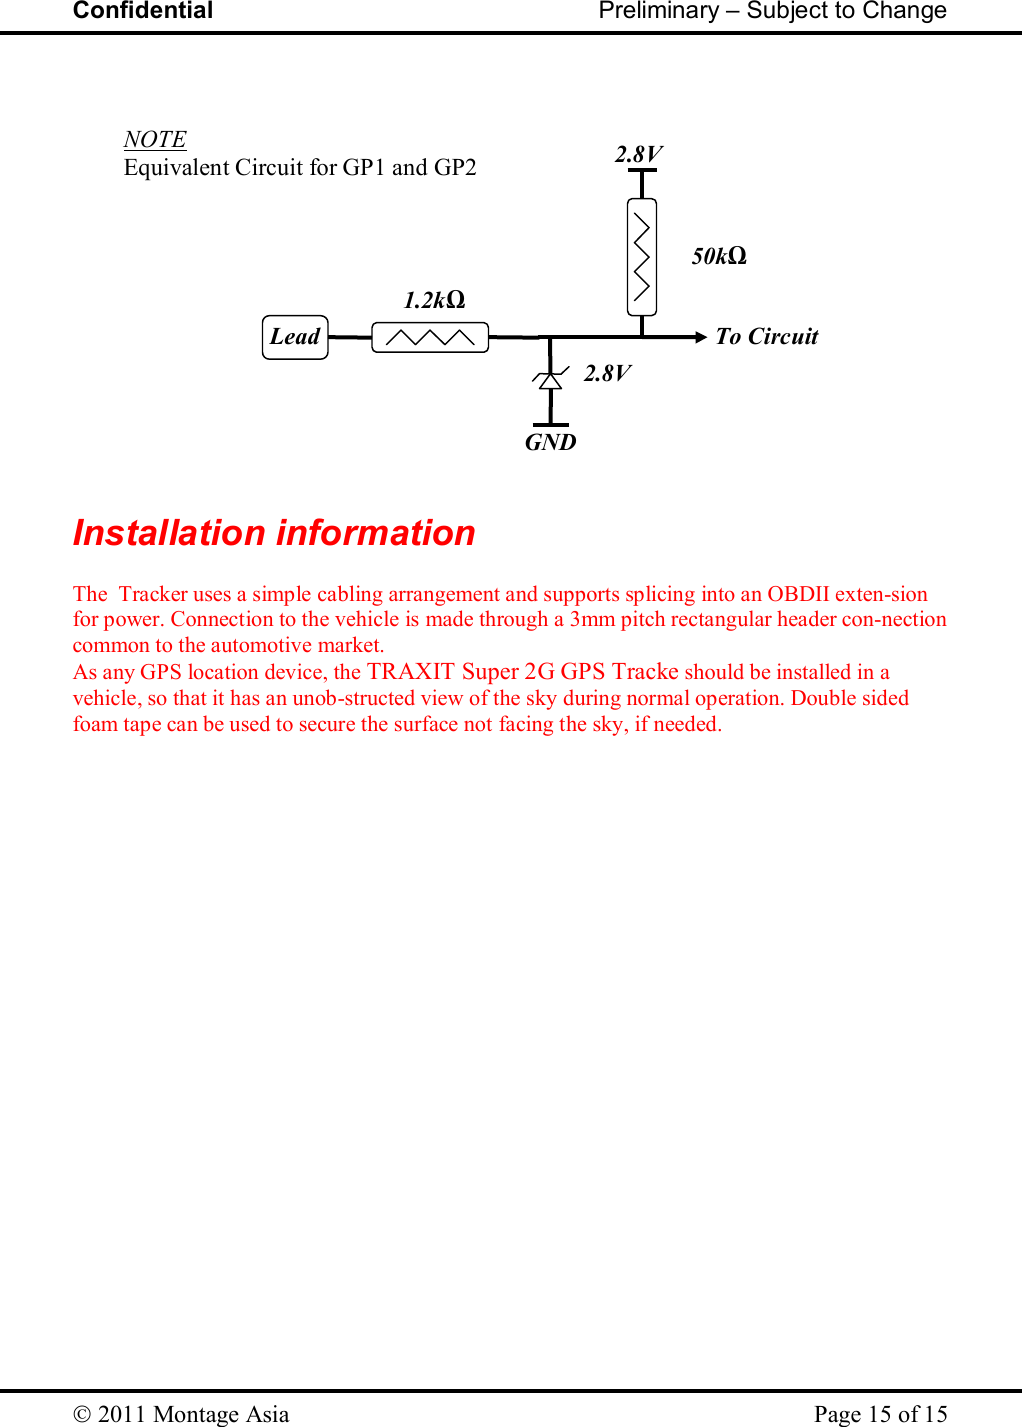 Confidential                                                         Preliminary – Subject to Change   2011 Montage Asia    Page 15 of 15     Installation information      The  Tracker uses a simple cabling arrangement and supports splicing into an OBDII exten-sion for power. Connection to the vehicle is made through a 3mm pitch rectangular header con-nection common to the automotive market.  As any GPS location device, the TRAXIT Super 2G GPS Tracke should be installed in a vehicle, so that it has an unob-structed view of the sky during normal operation. Double sided foam tape can be used to secure the surface not facing the sky, if needed. Lead 1.2kΩ 2.8V GND 2.8V 50kΩ To Circuit NOTE  Equivalent Circuit for GP1 and GP2 